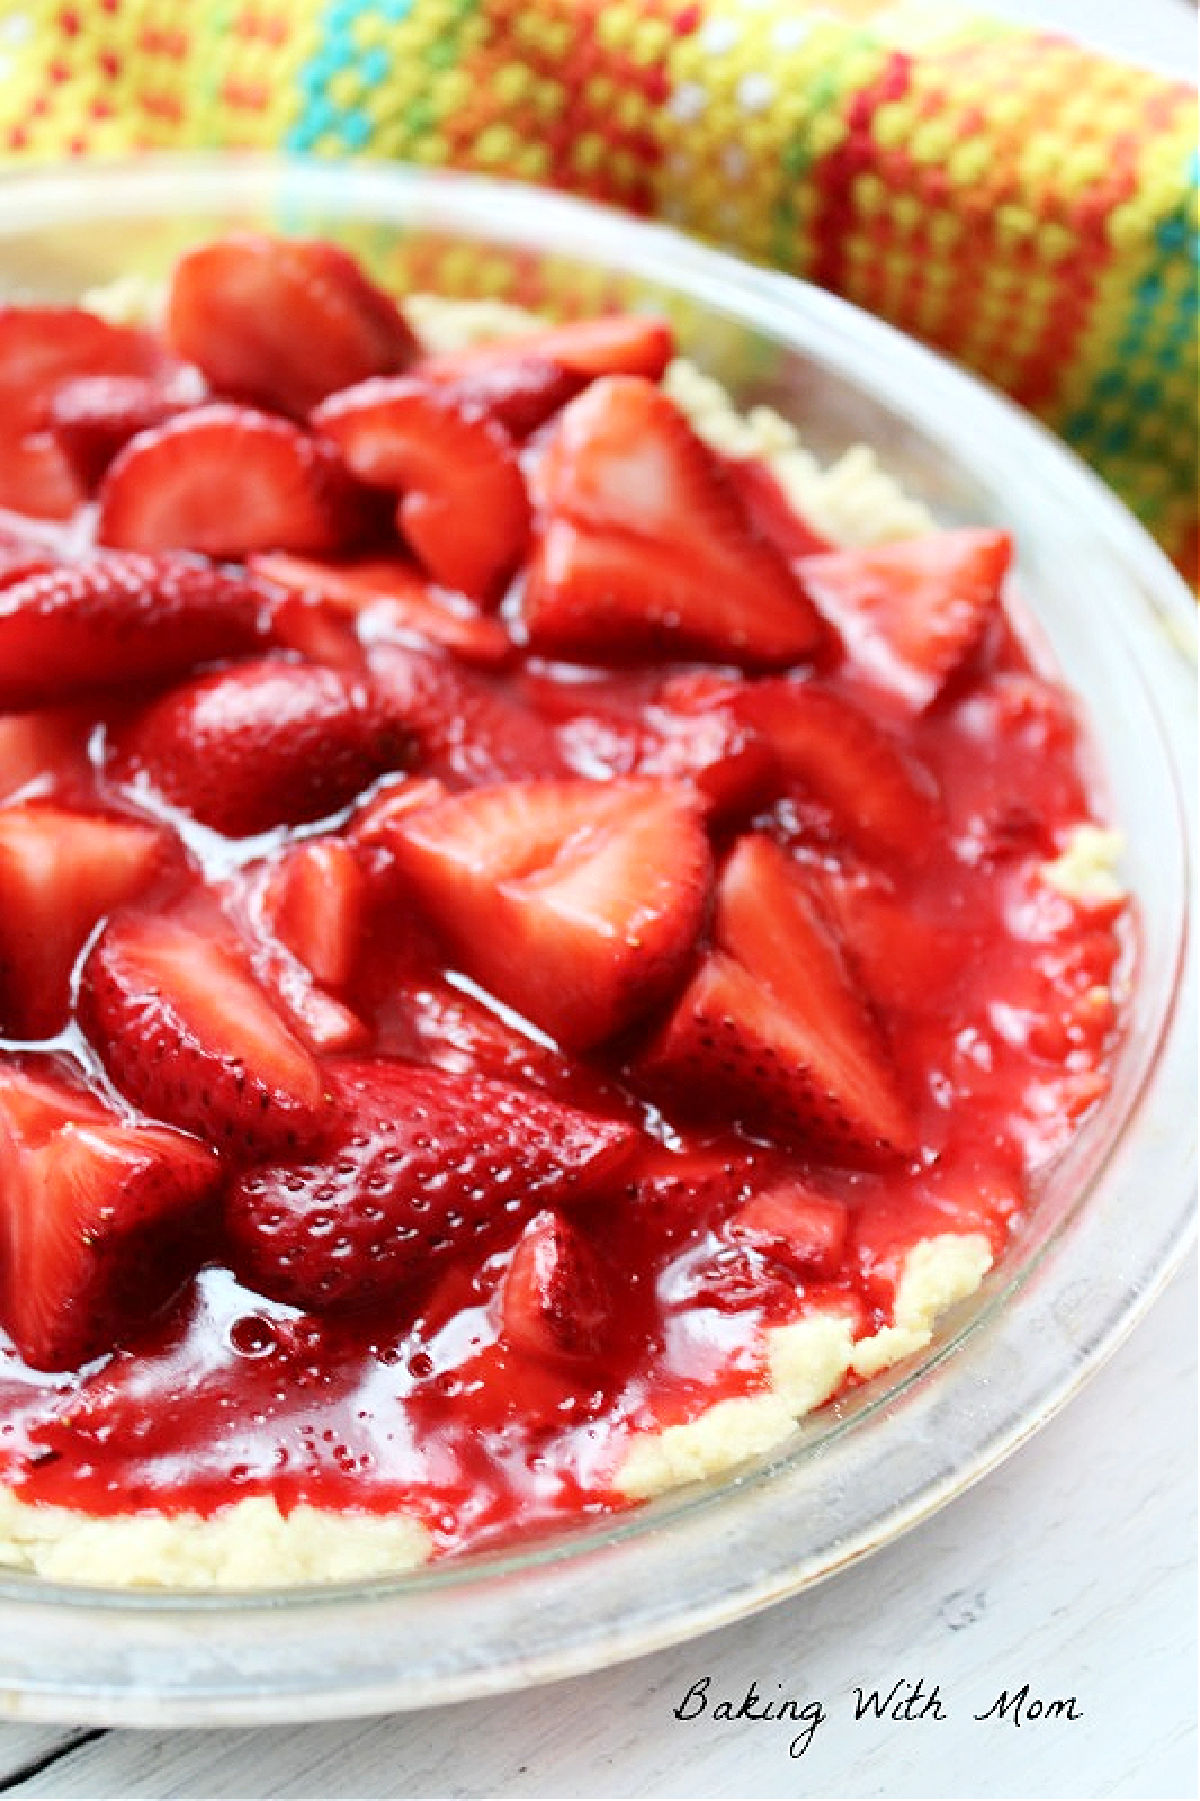 Strawberry pie in a pie pan with a colored towel behind.